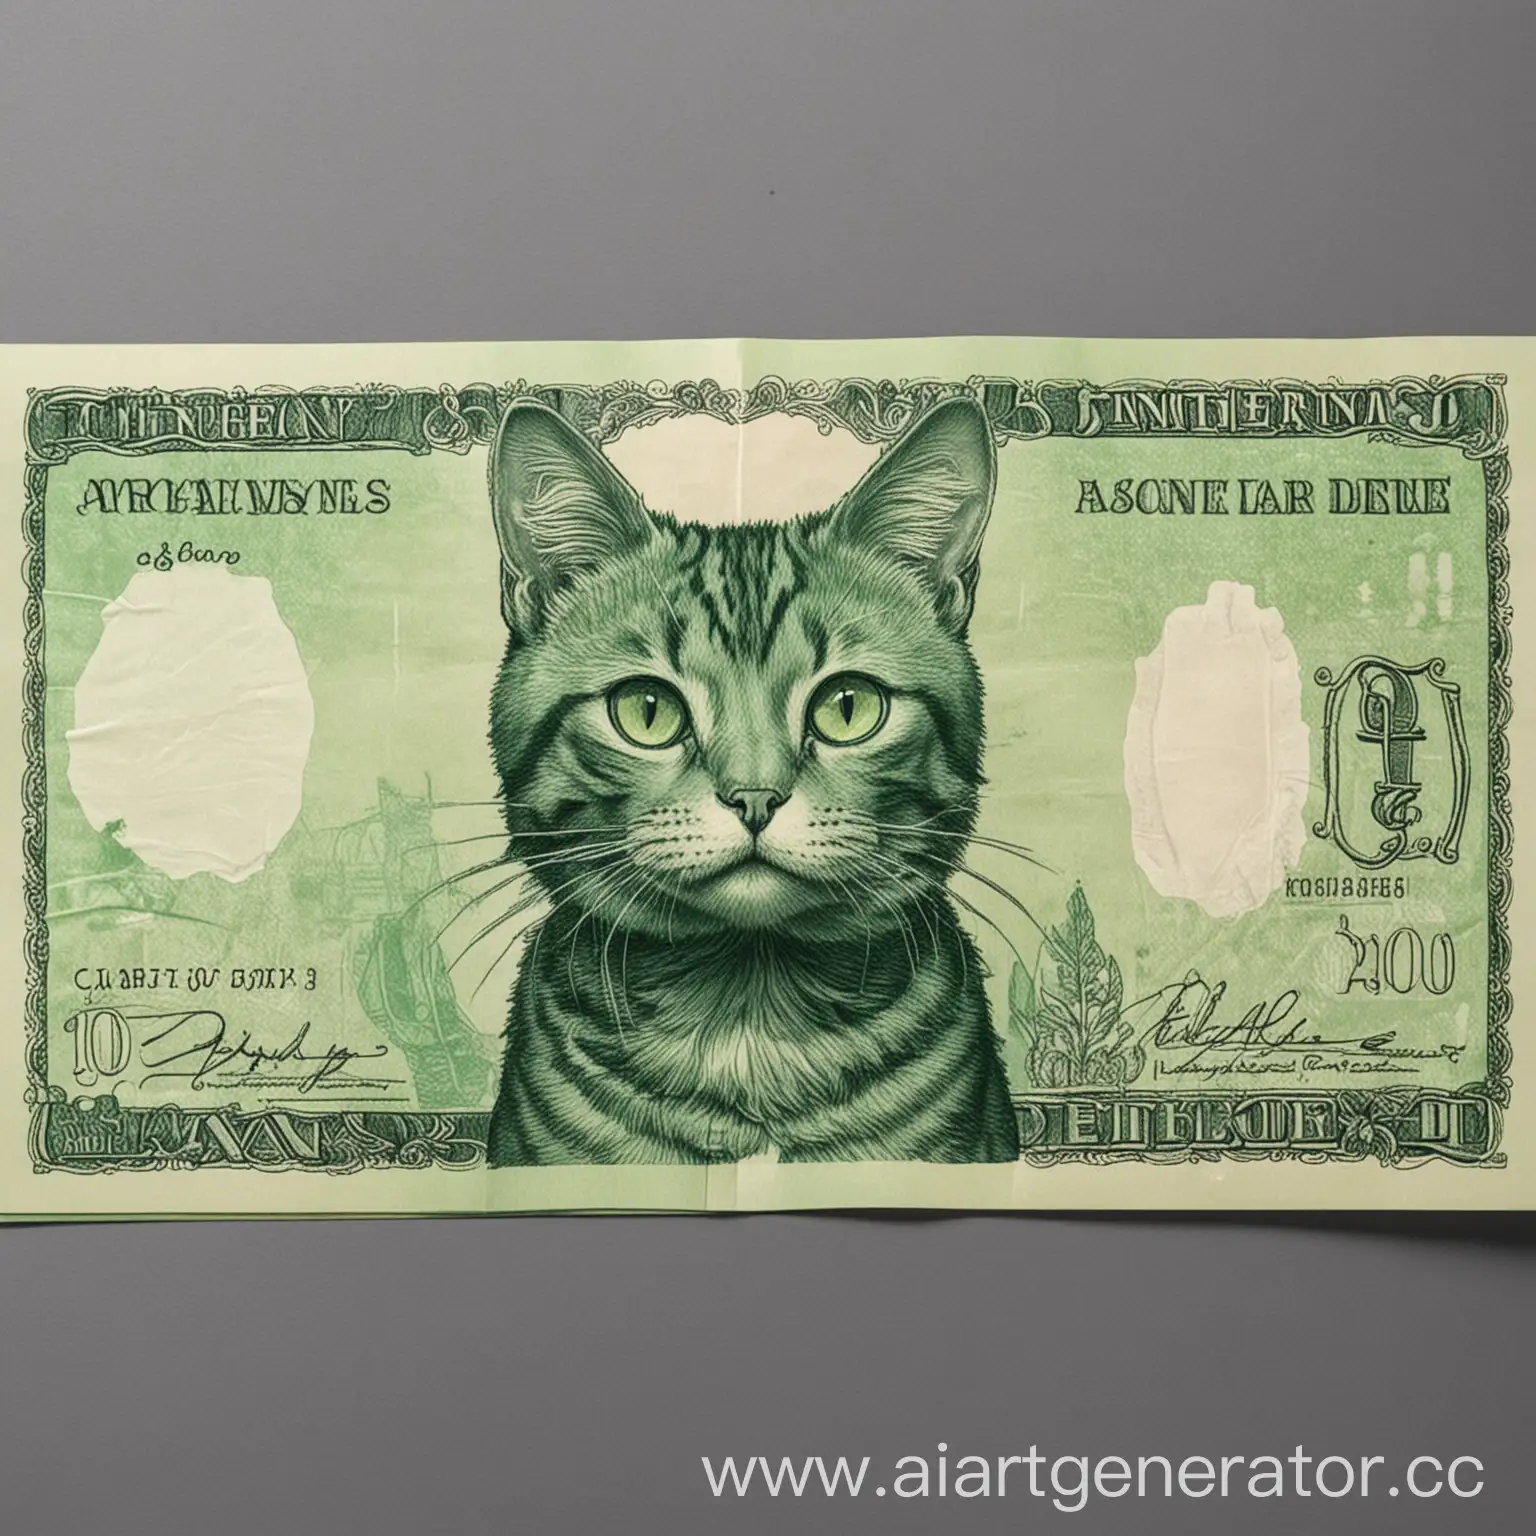 Green-Banknote-with-Cat-Image